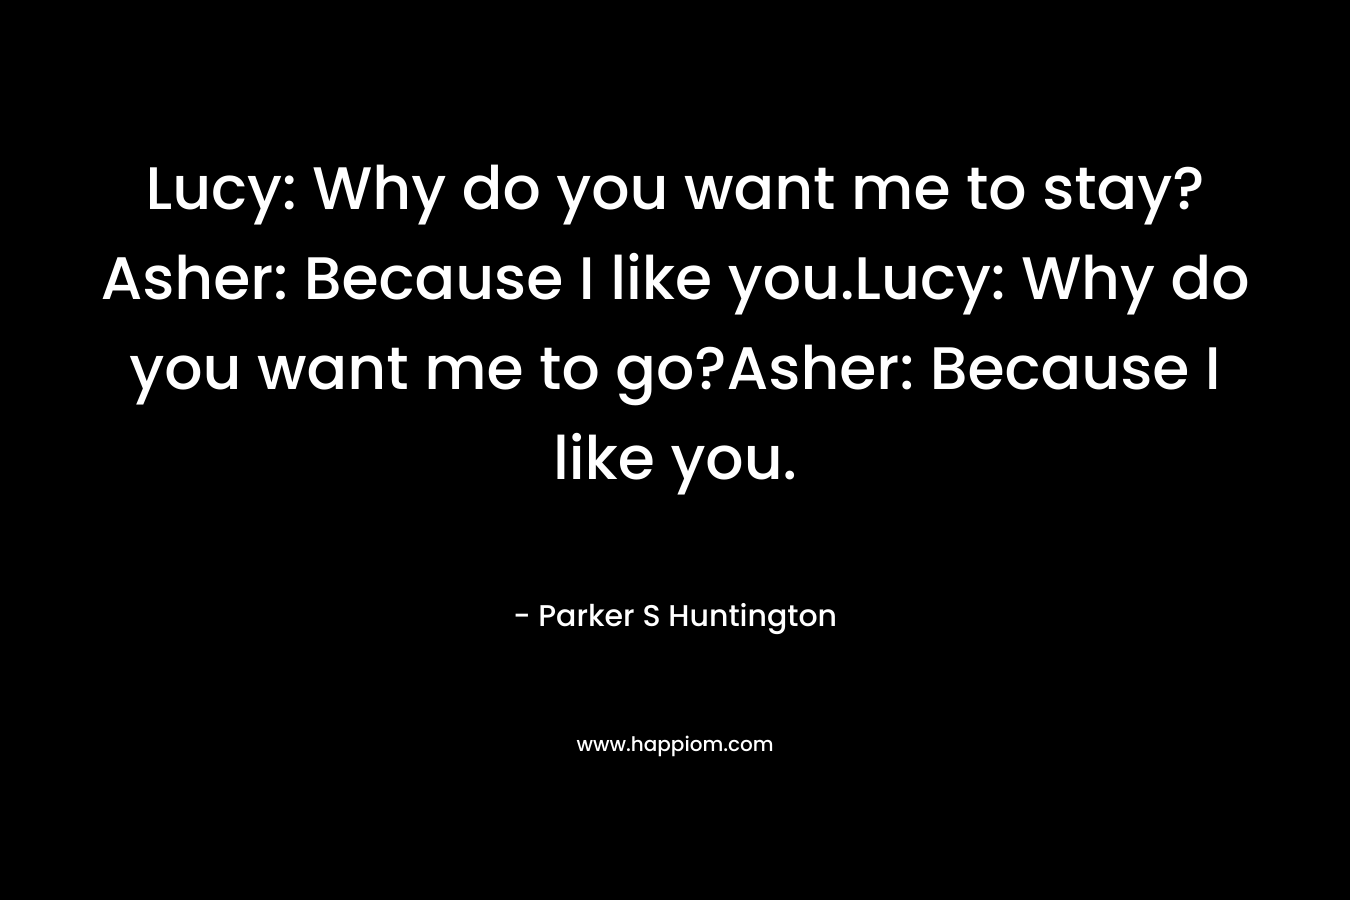 Lucy: Why do you want me to stay?Asher: Because I like you.Lucy: Why do you want me to go?Asher: Because I like you. – Parker S Huntington